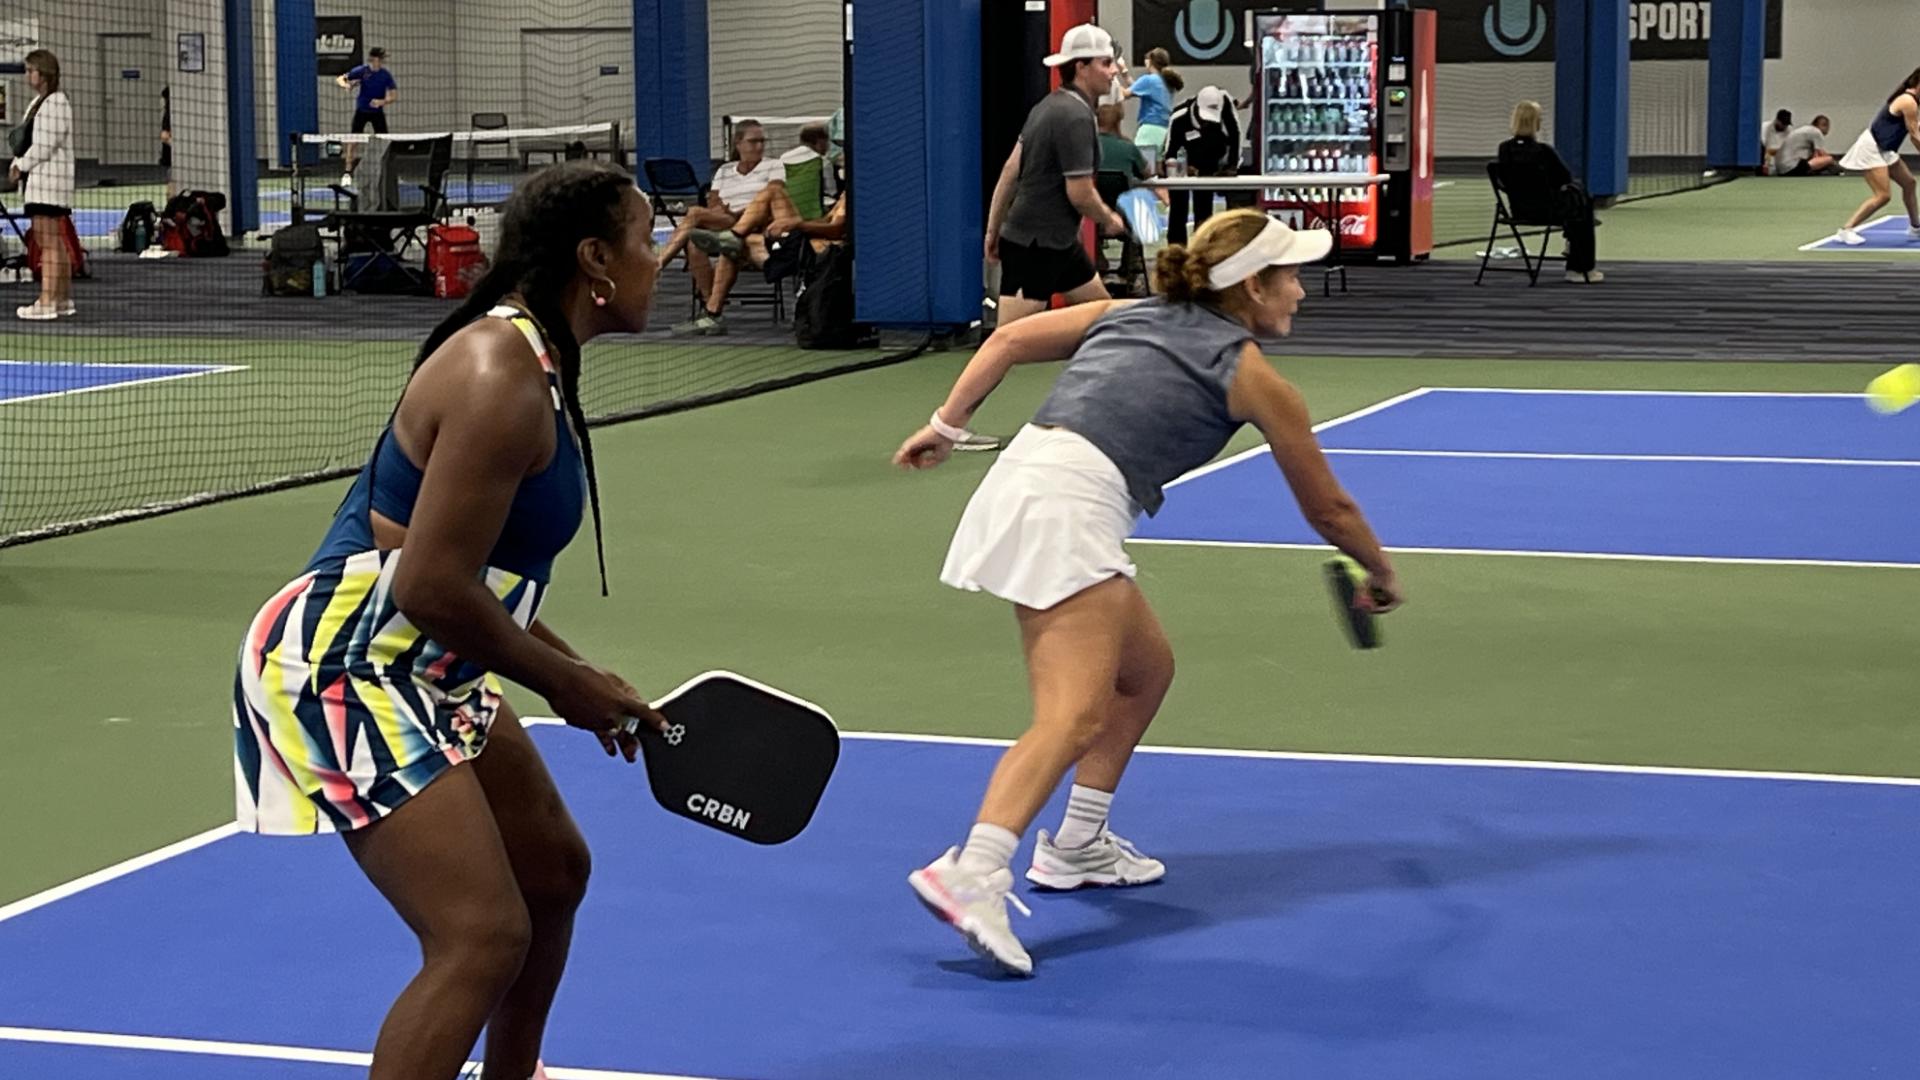 The facility is the world's largest indoor pickleball facility, and welcomed pickleball enthusiasts from across the country.